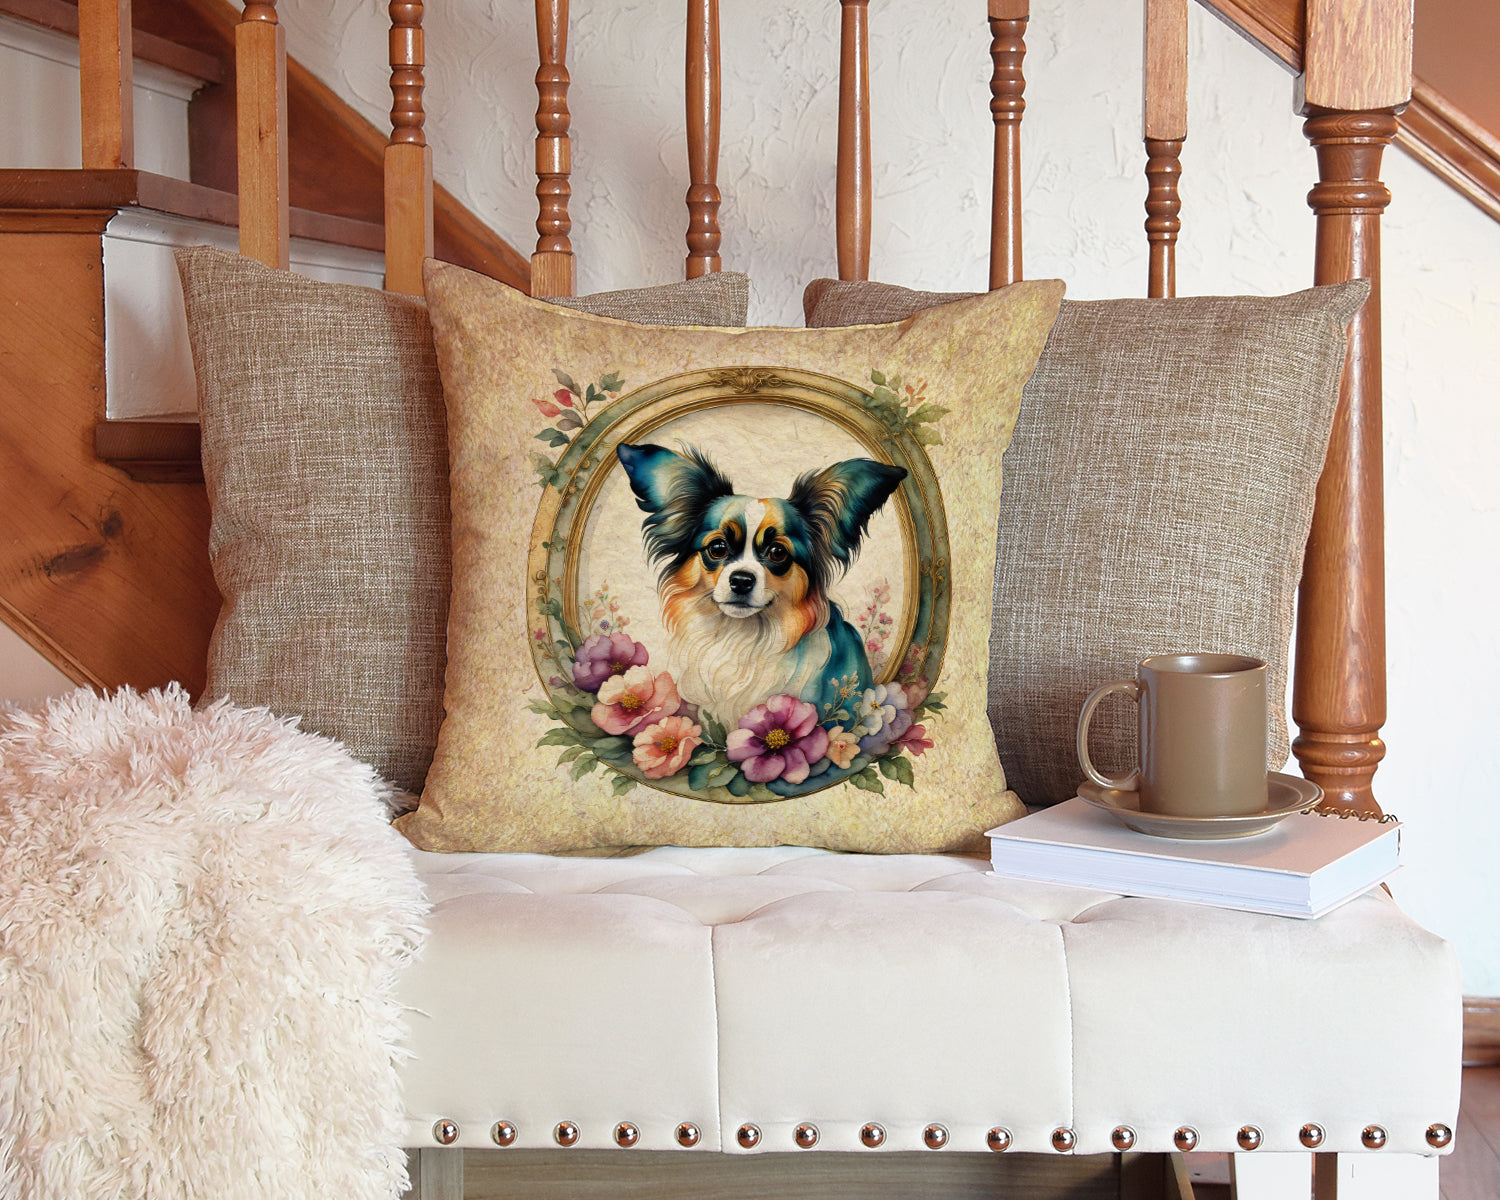 Papillon and Flowers Fabric Decorative Pillow